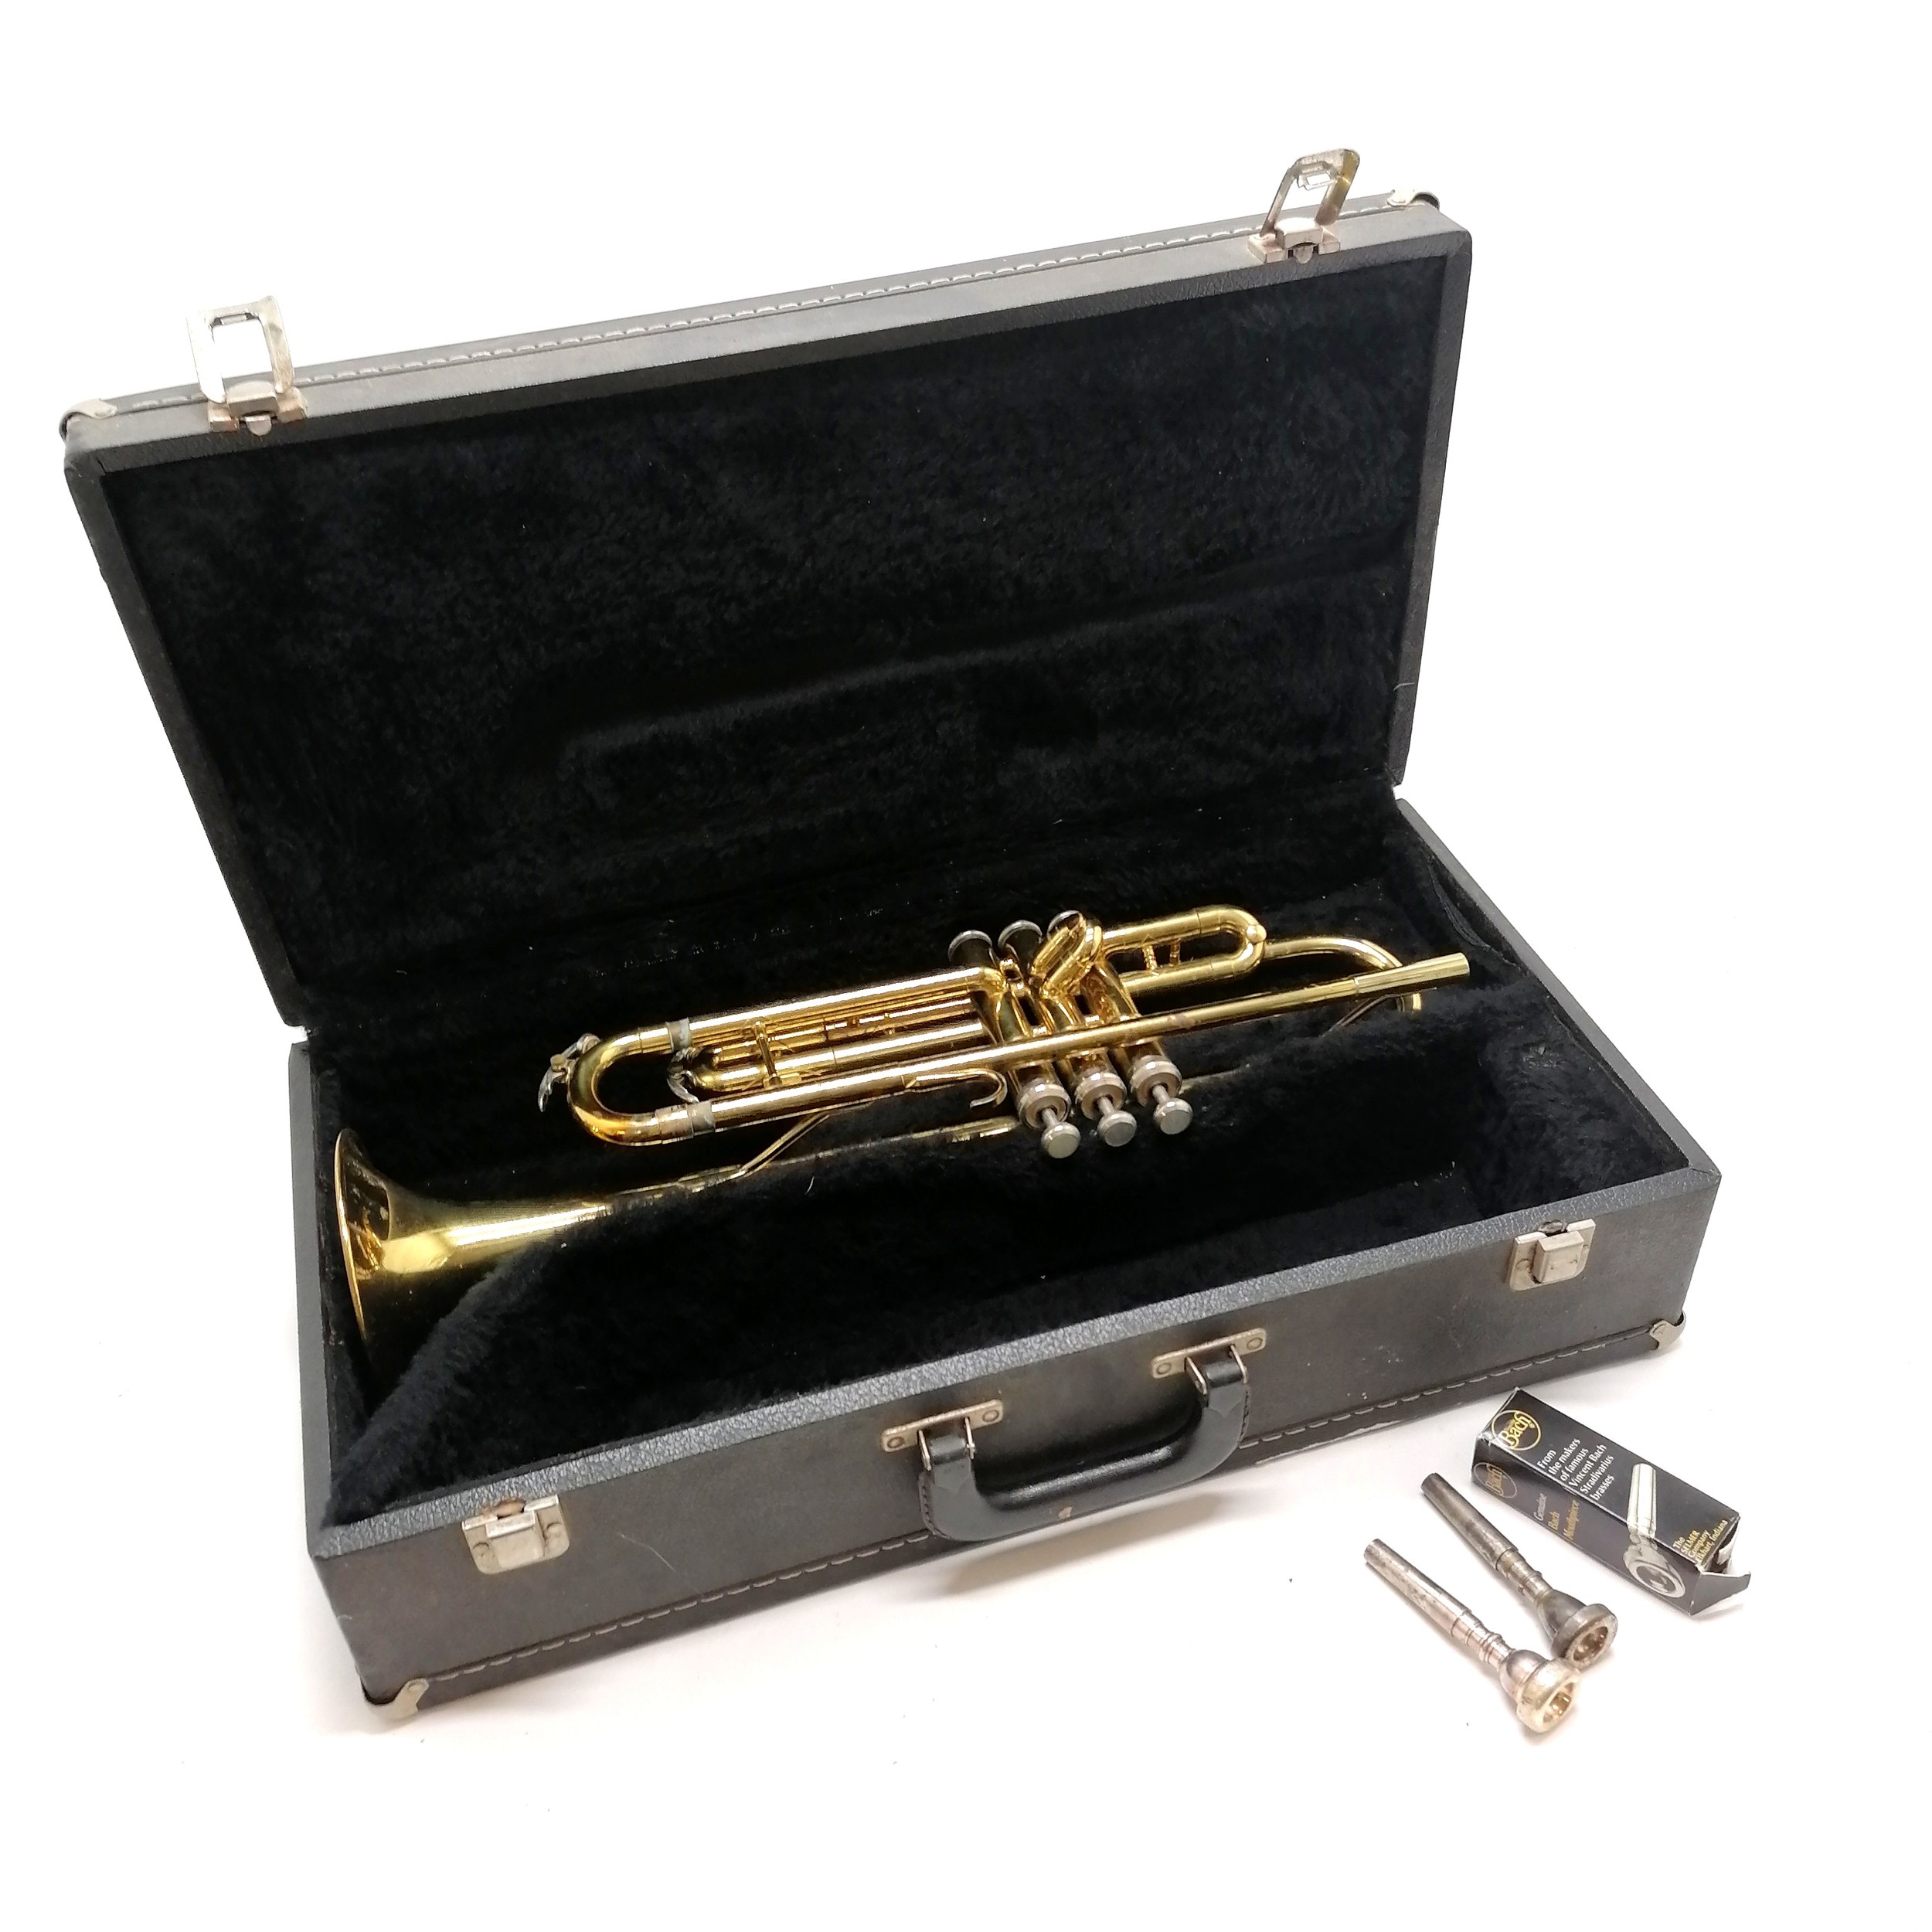 King 600 USA brass trumpet #458 with Holton & 7C mouthpieces in original carry case